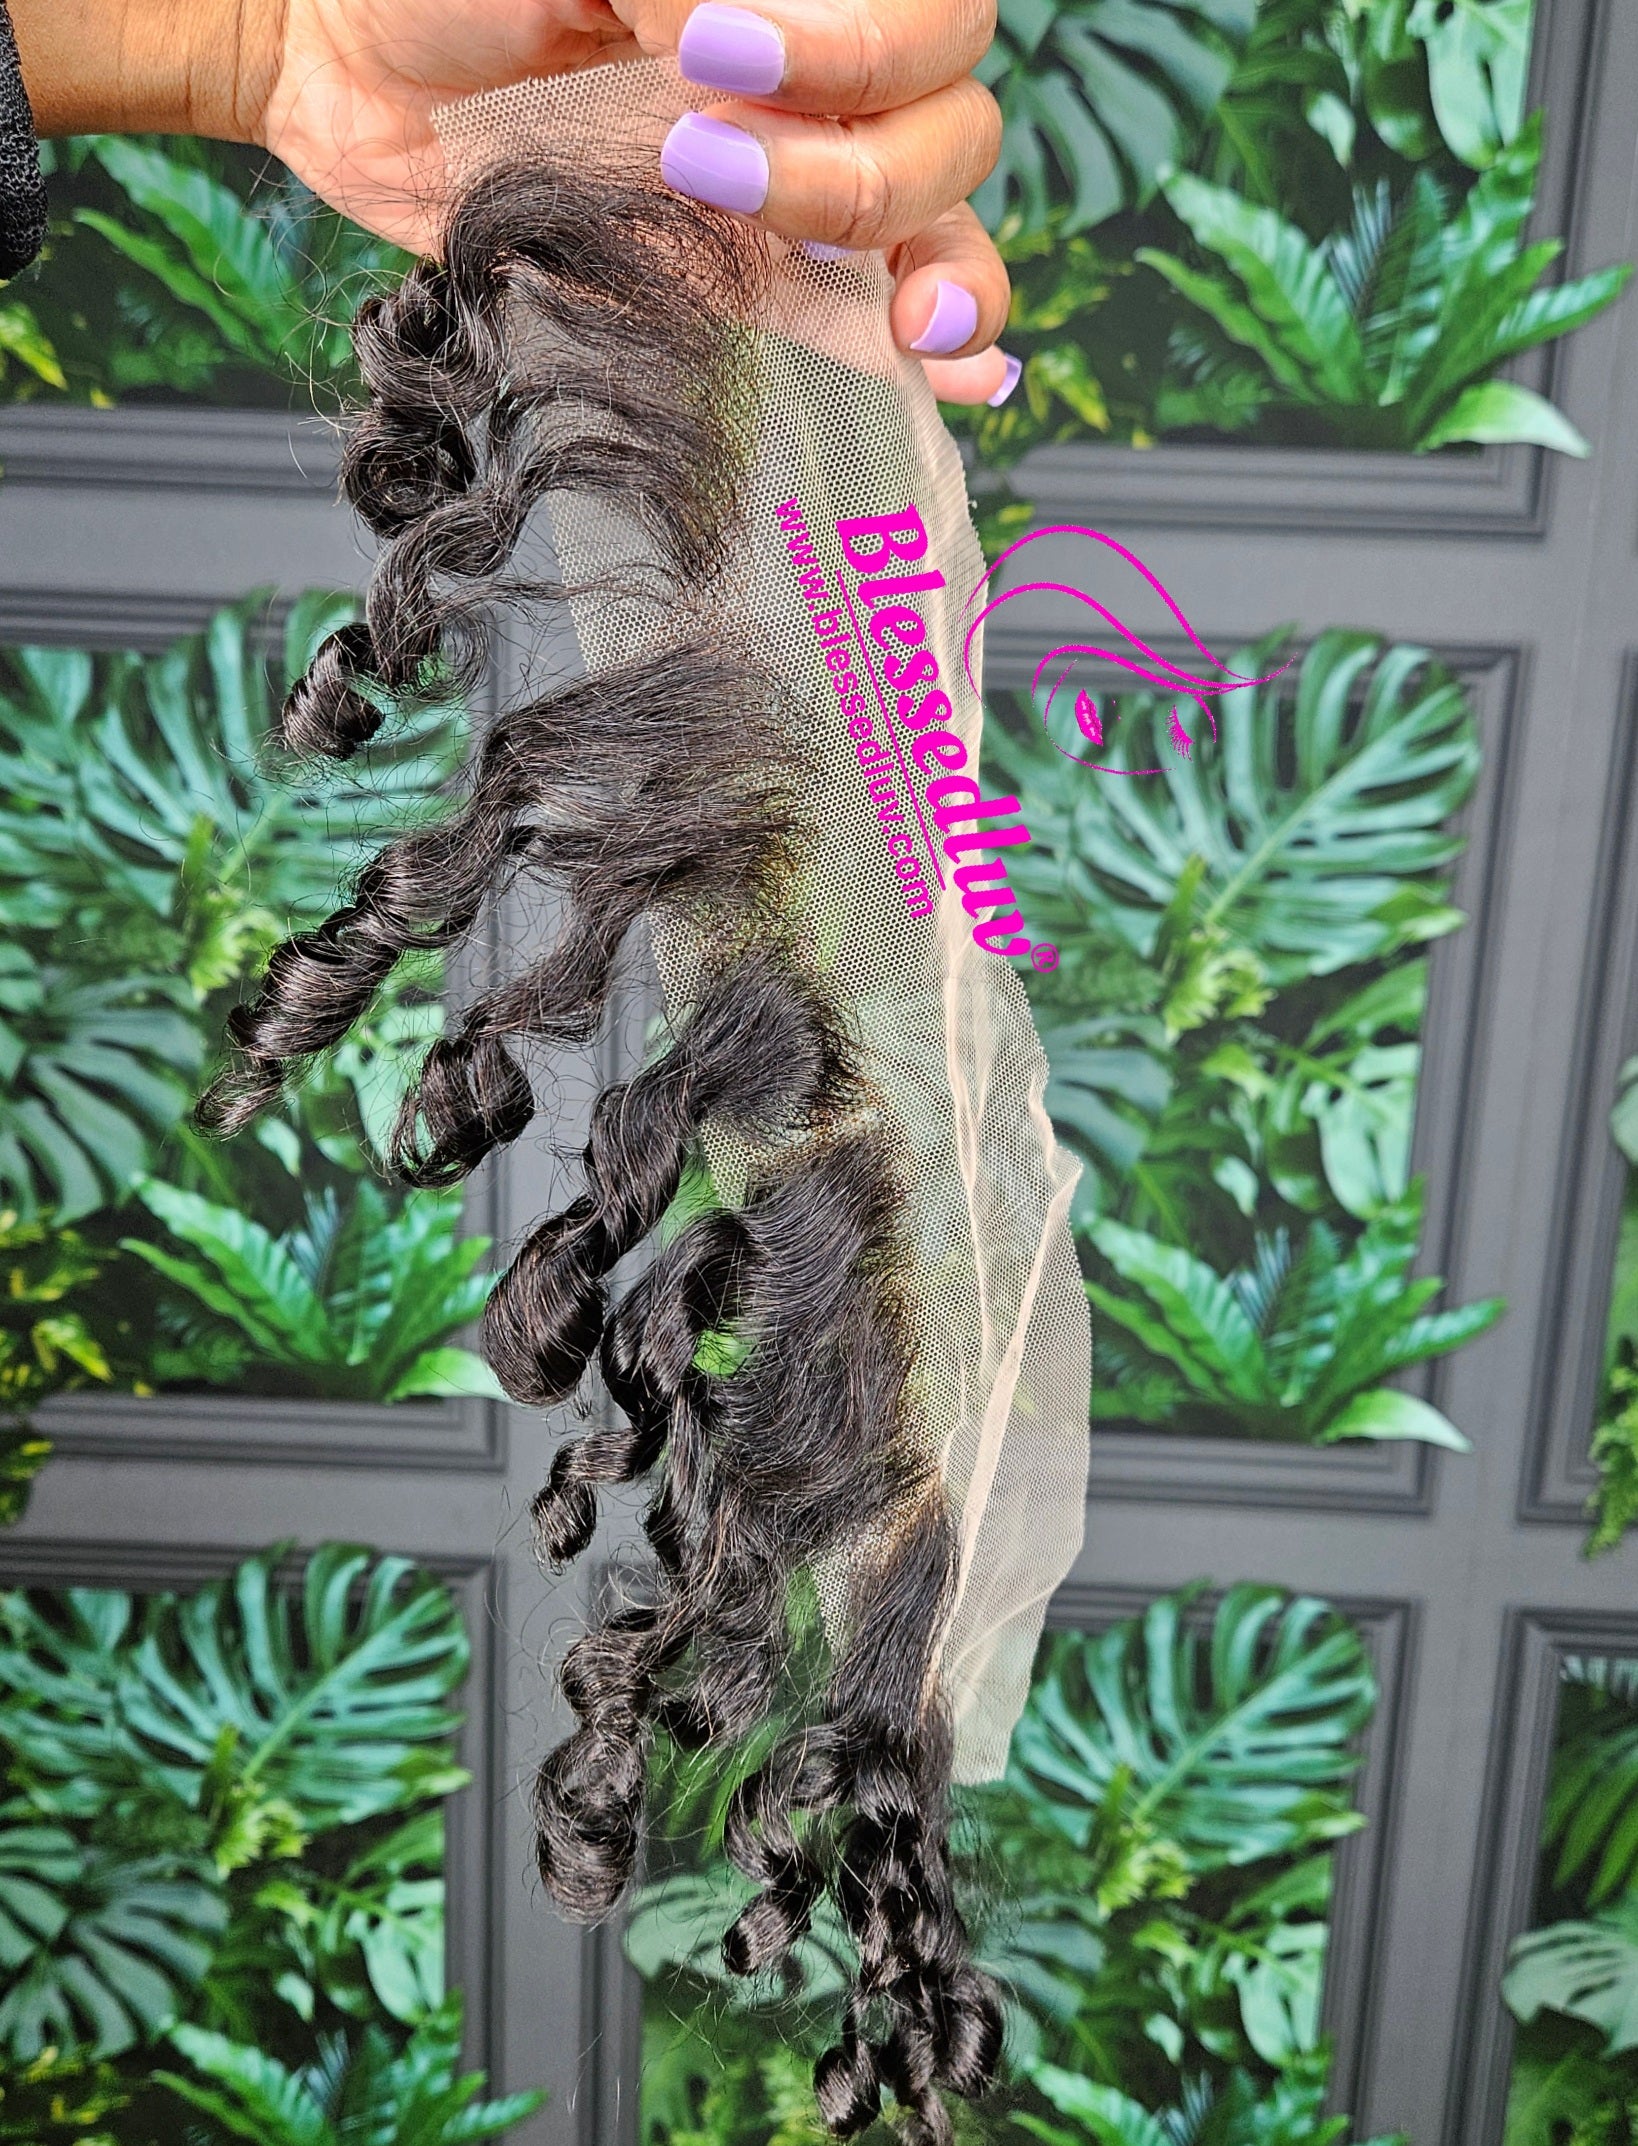 13x1 HD Swiss Lace Baby Hair- Curly-Wigs-www.blessedluv.com-Brazilianweave.com